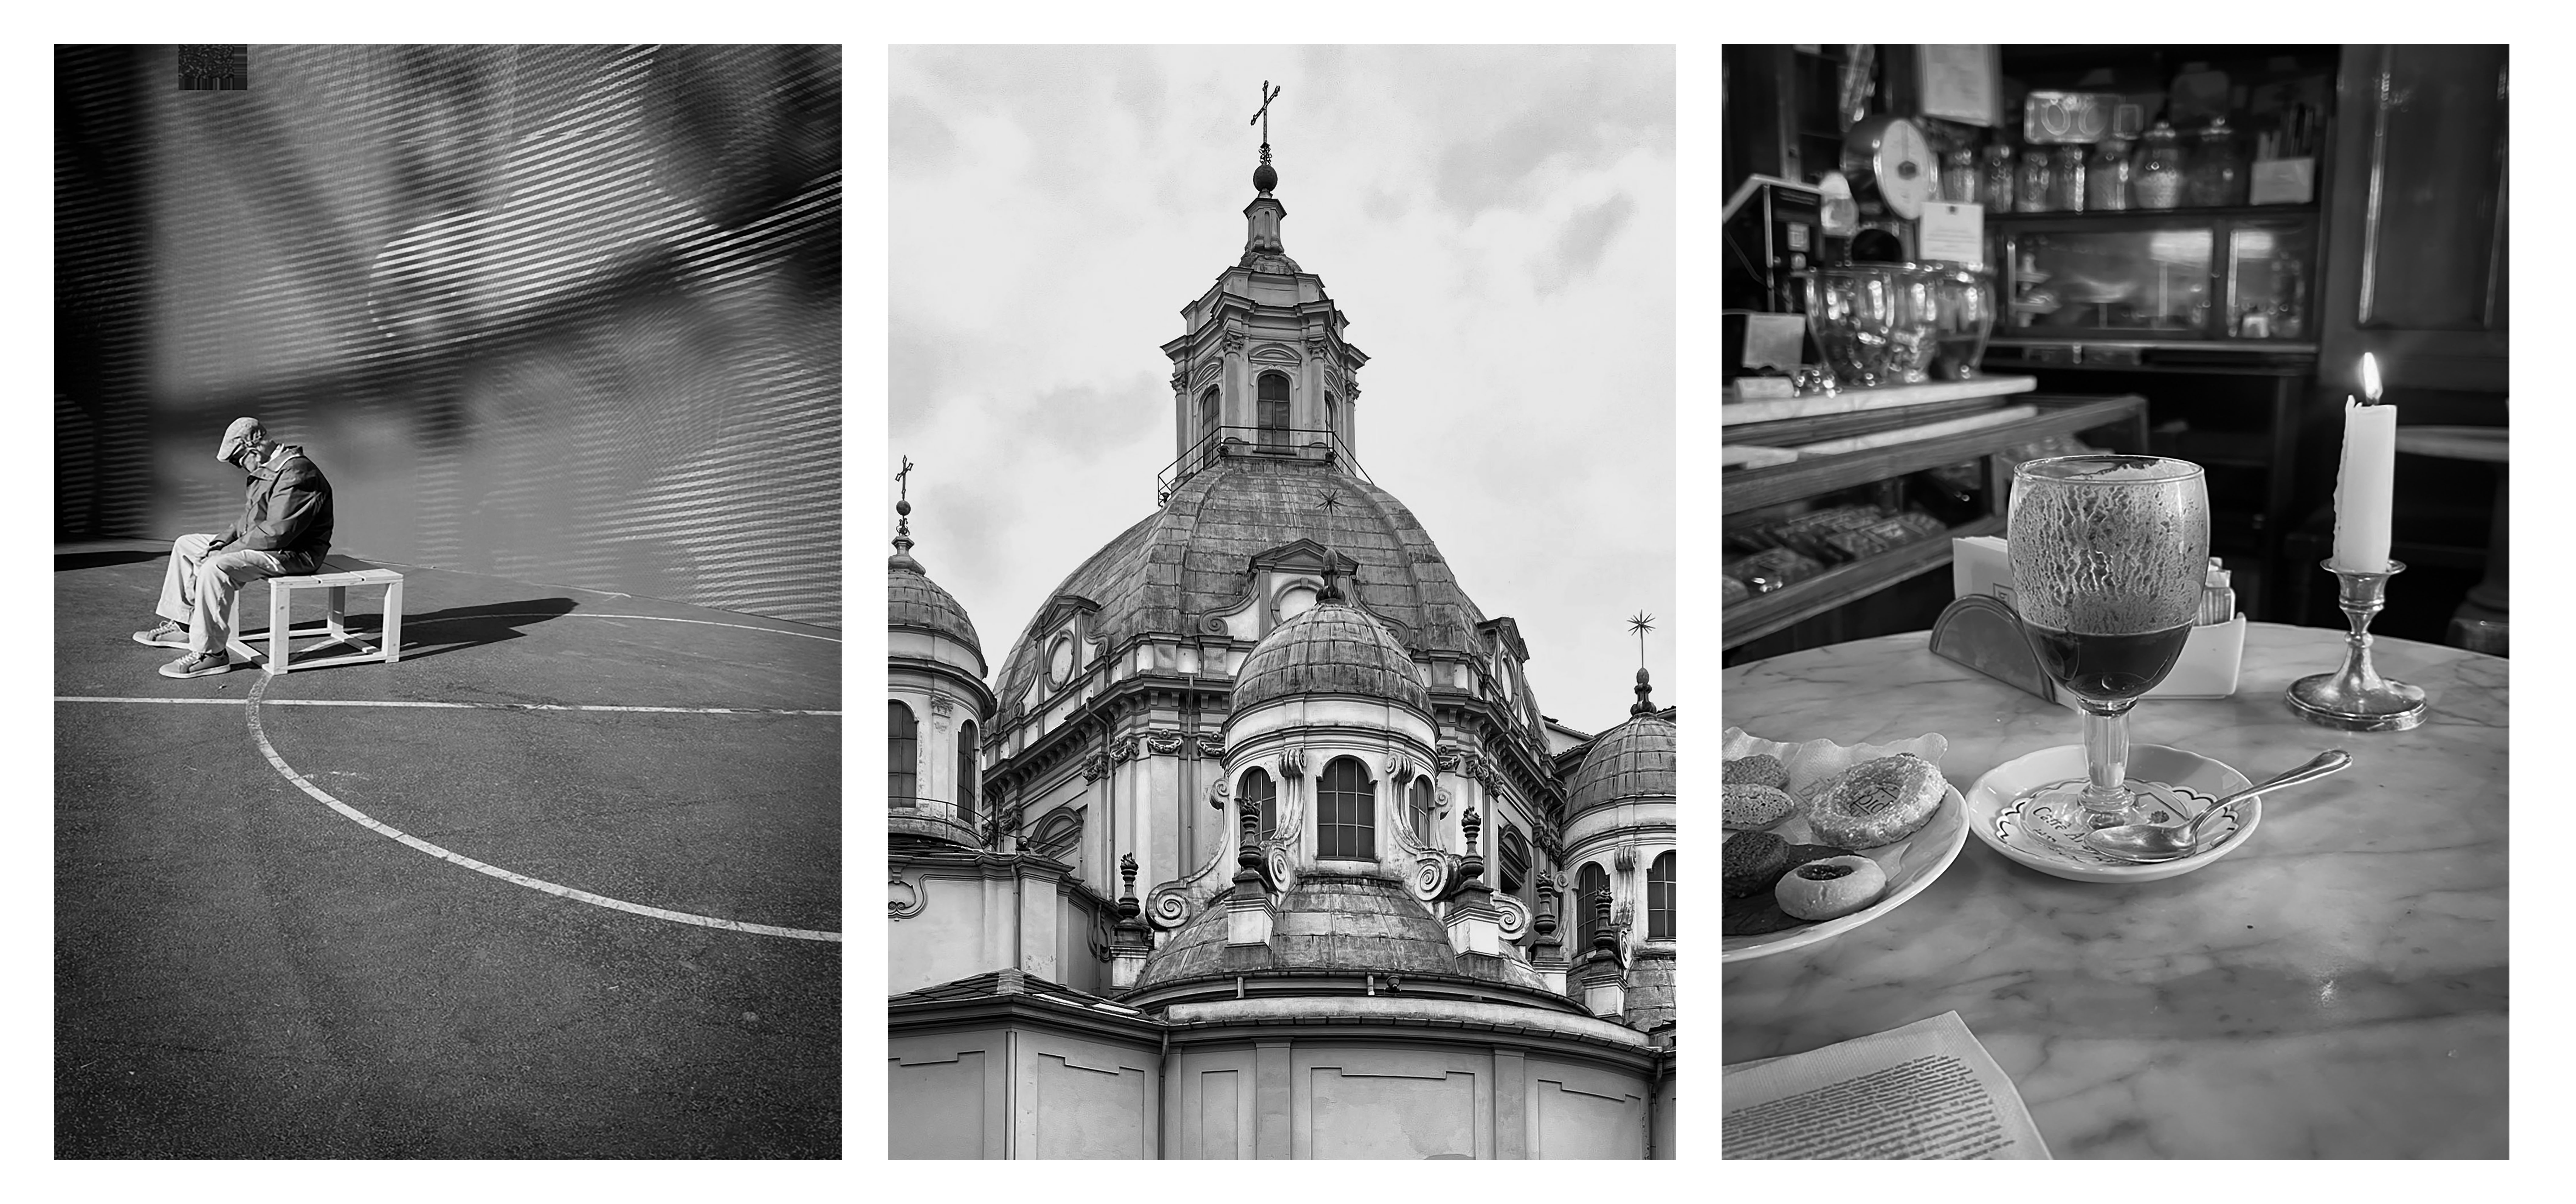 Scenes from the city of Turin,  including the infamous bicerin,  a traditional hot drink native to the city. Served in its namesake glass, the rich beverage is made of three distinct layers: espresso, hot chocolate, and whipped milk or cream.